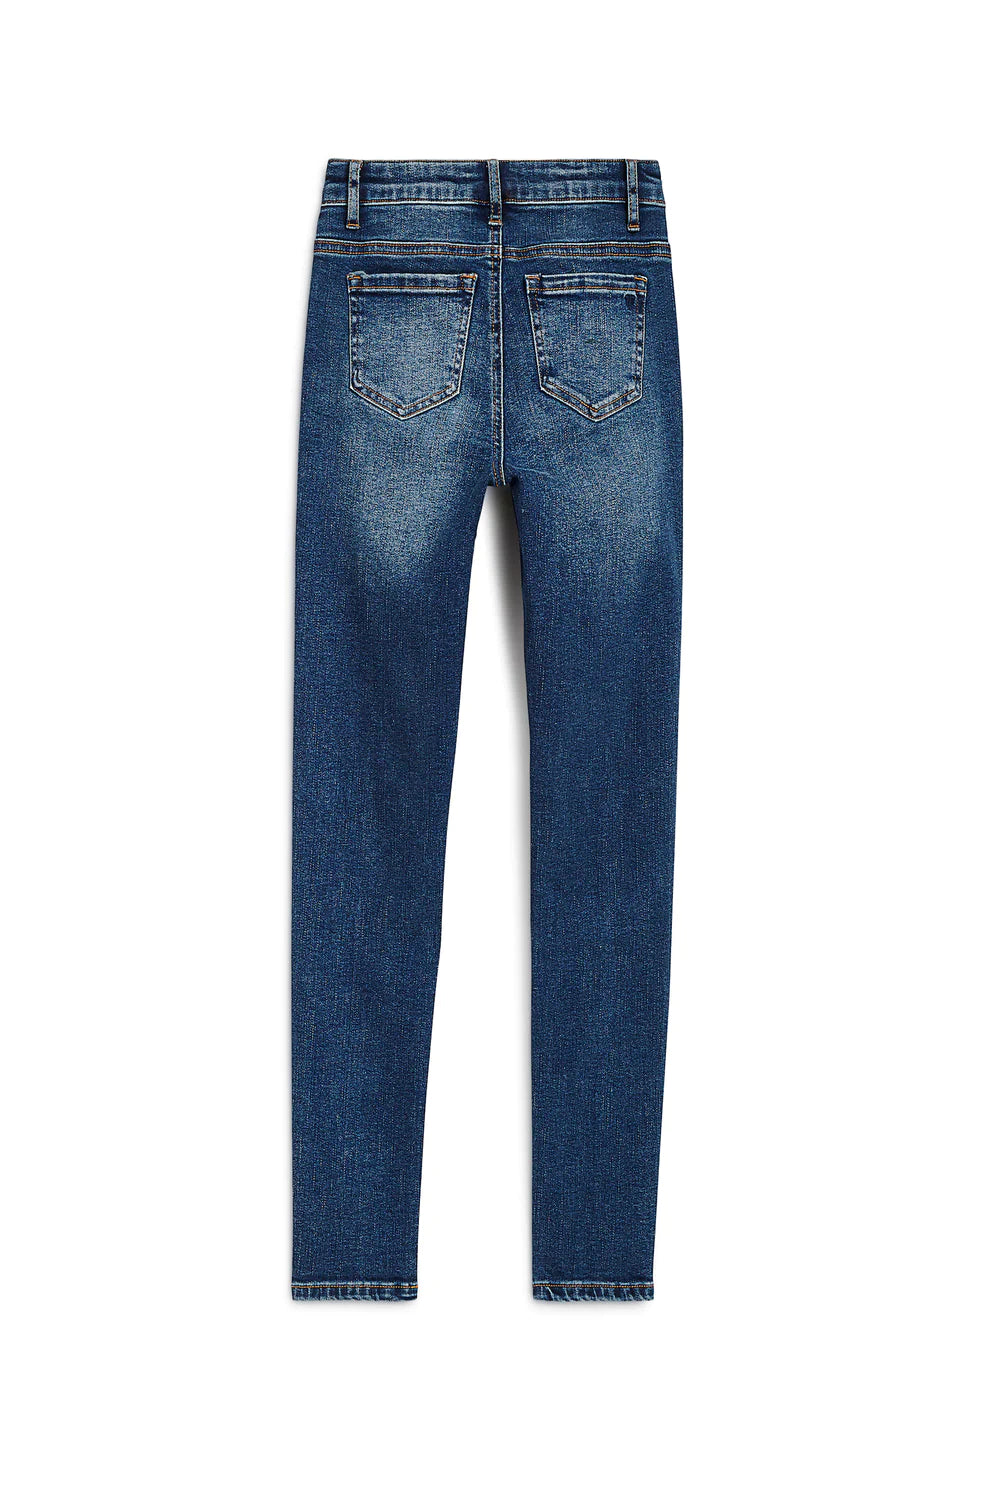 Tractr Nina Youth Jeans